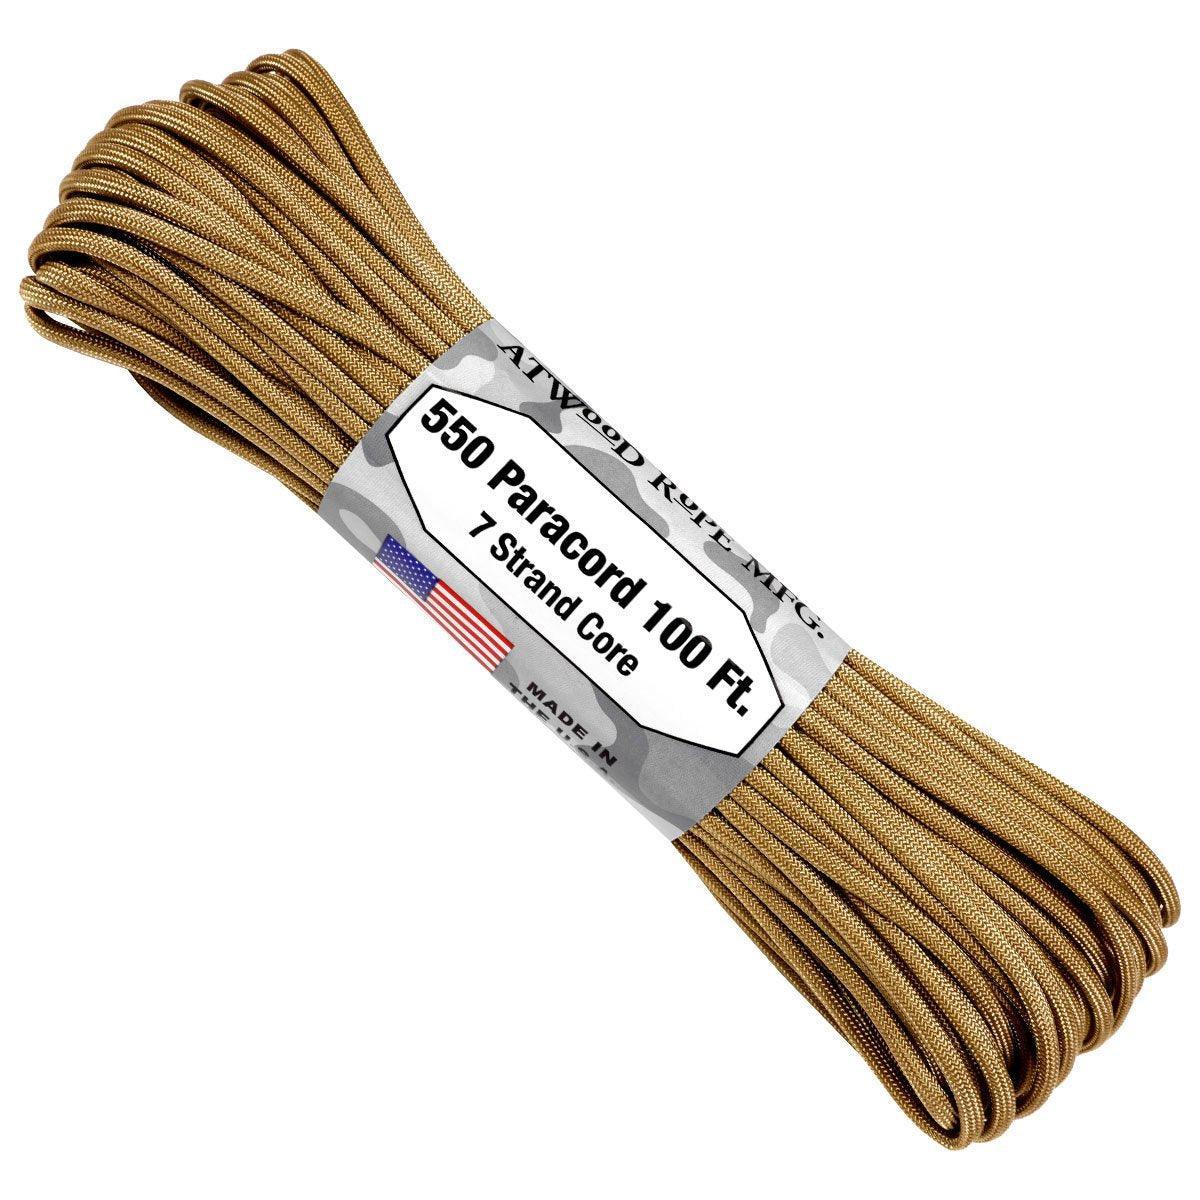 Atwood Paracord - Tan - Cams Cords